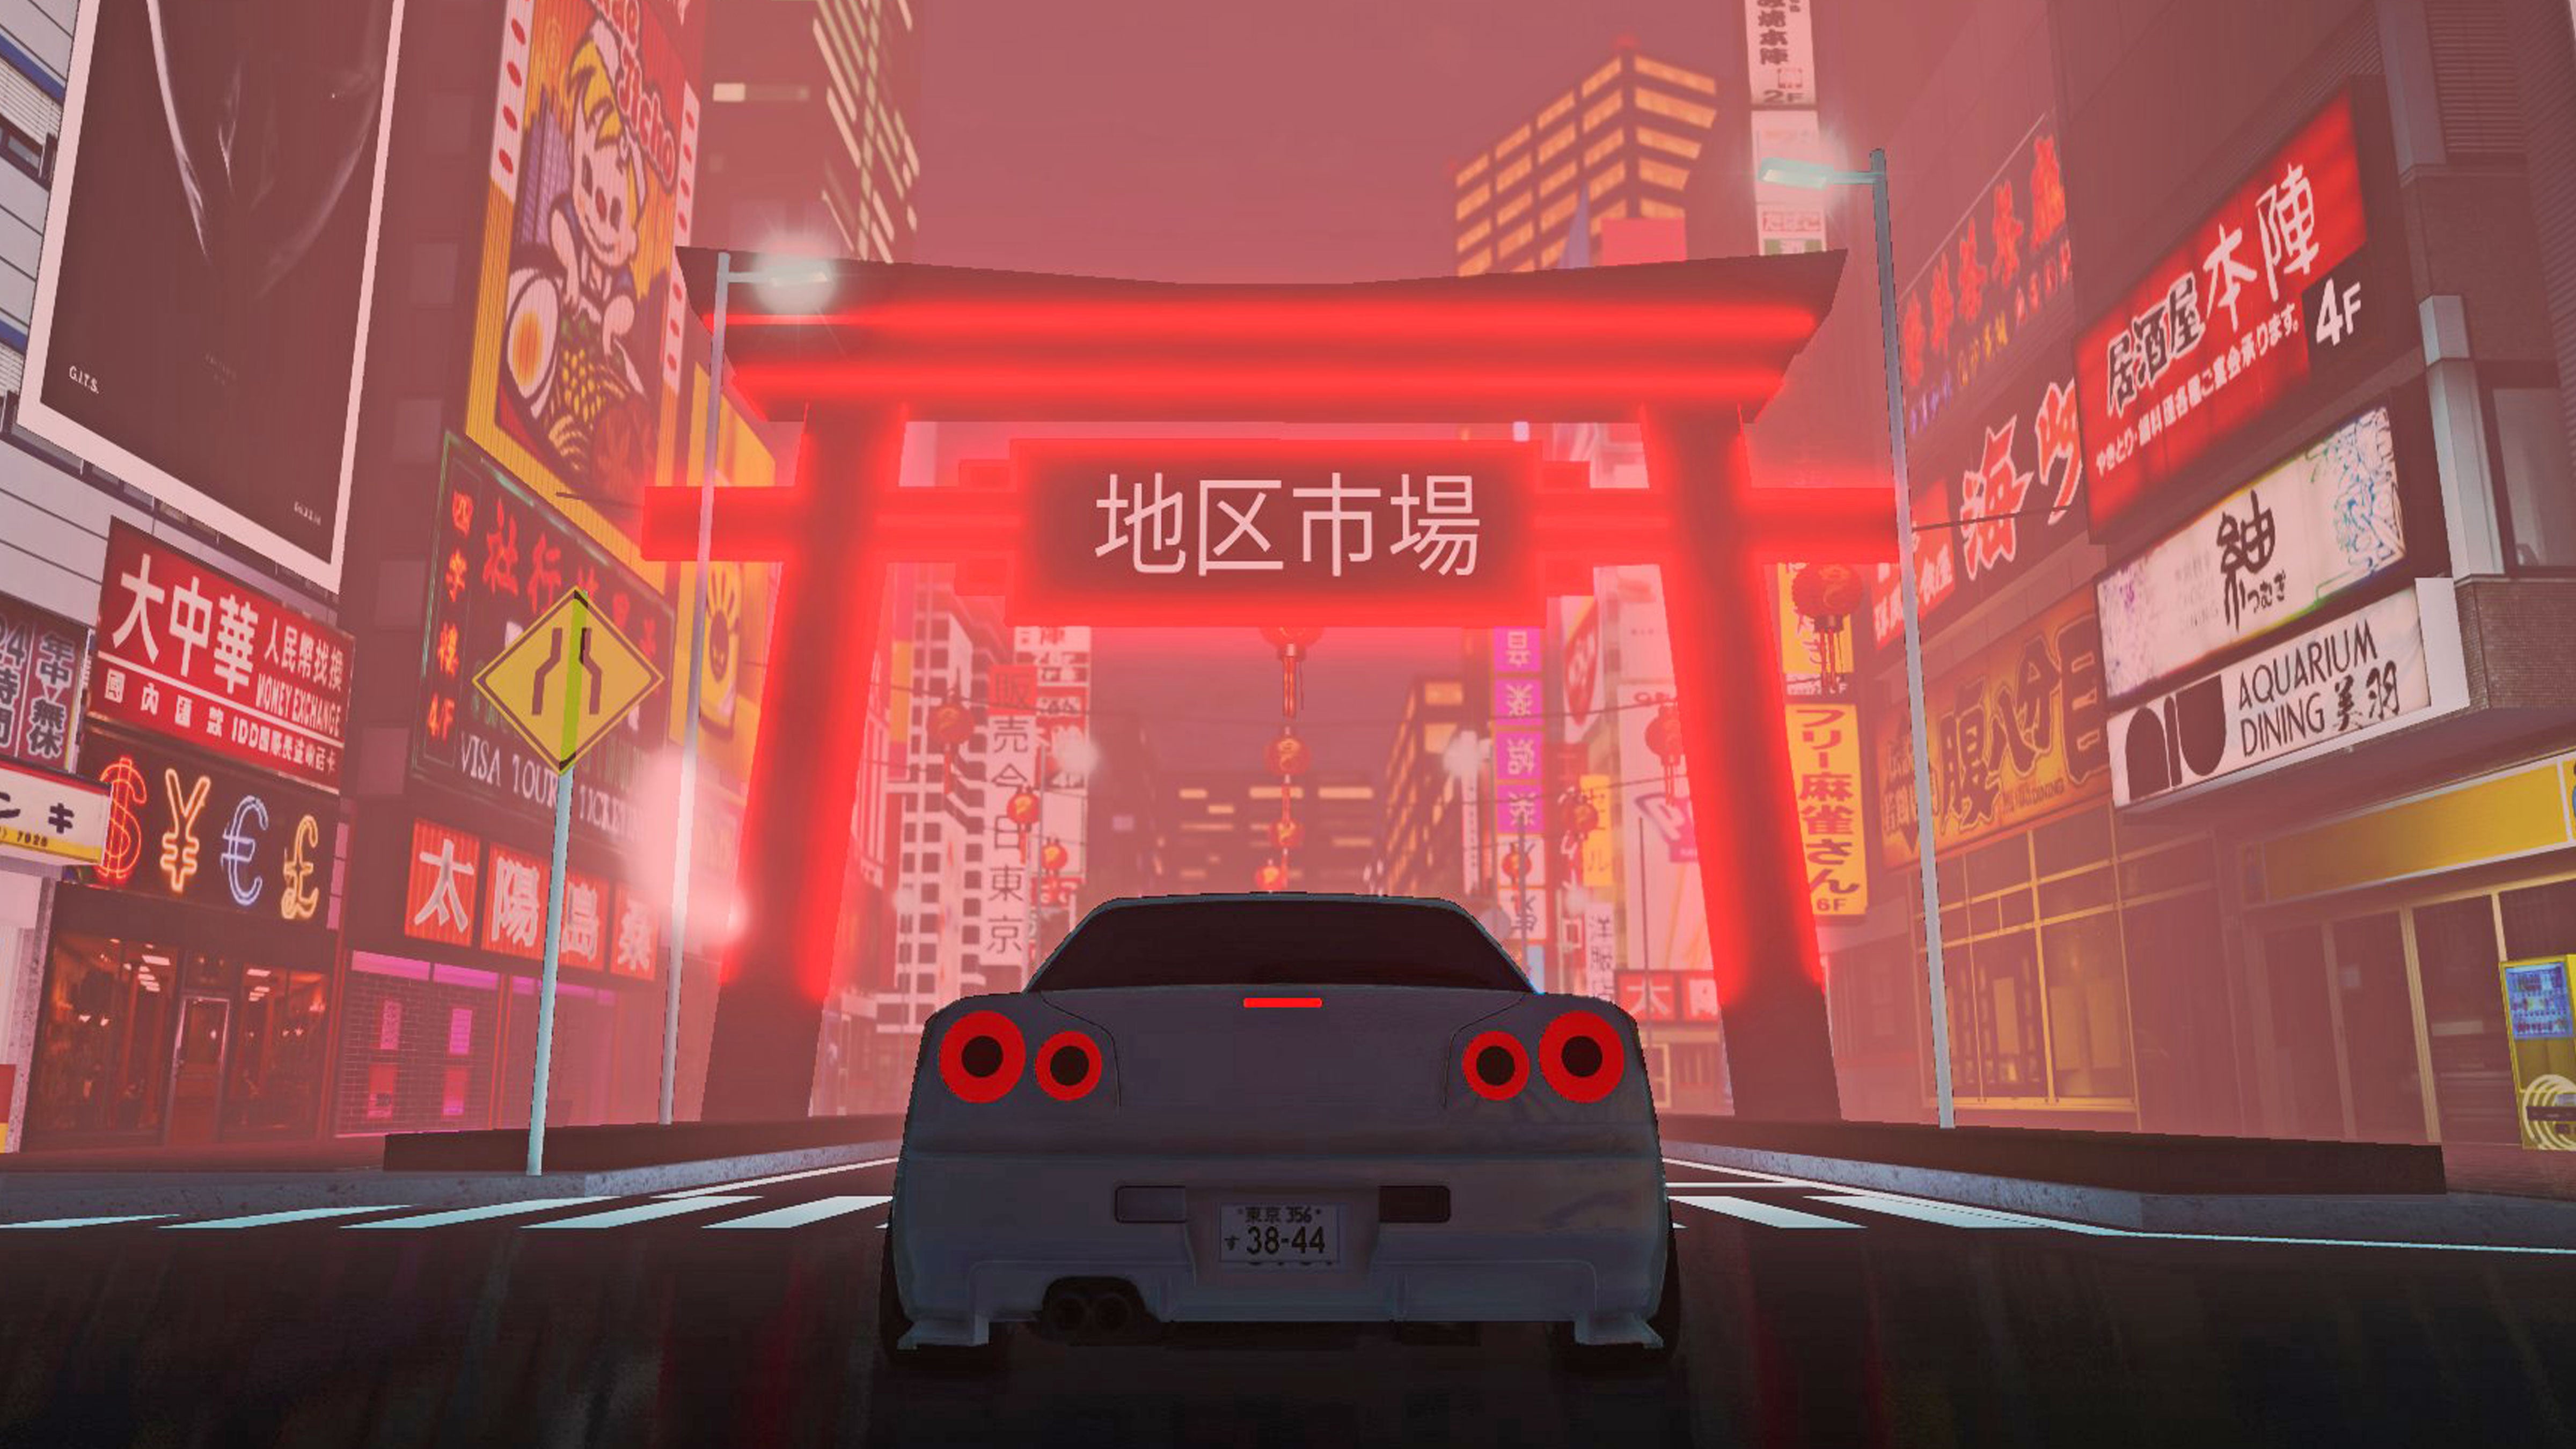 Artwork for Roblox game Midnight Racing Tokyo showing a Japanese sports car in a Tokyo cityscape at night.